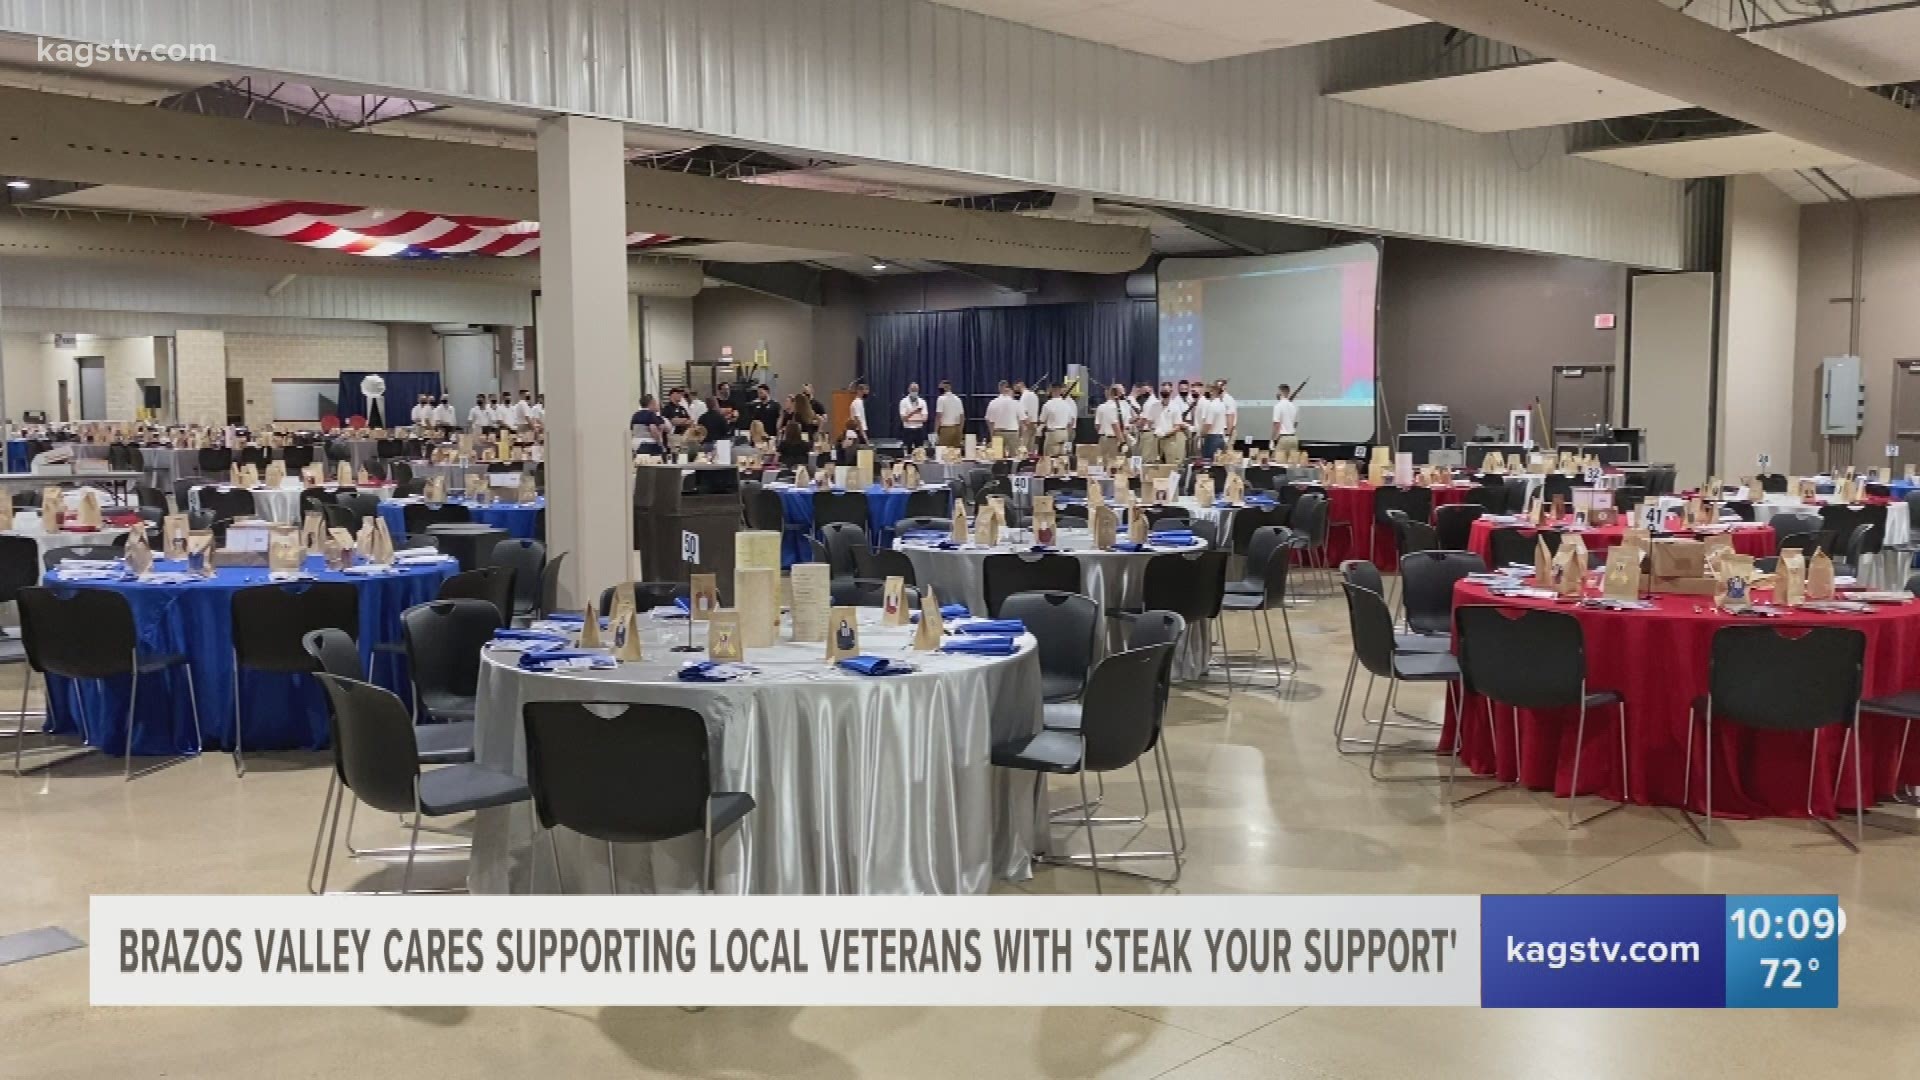 Steak Your Support has been able to raise and donate $515,000 to local veteran service organizations in the past.